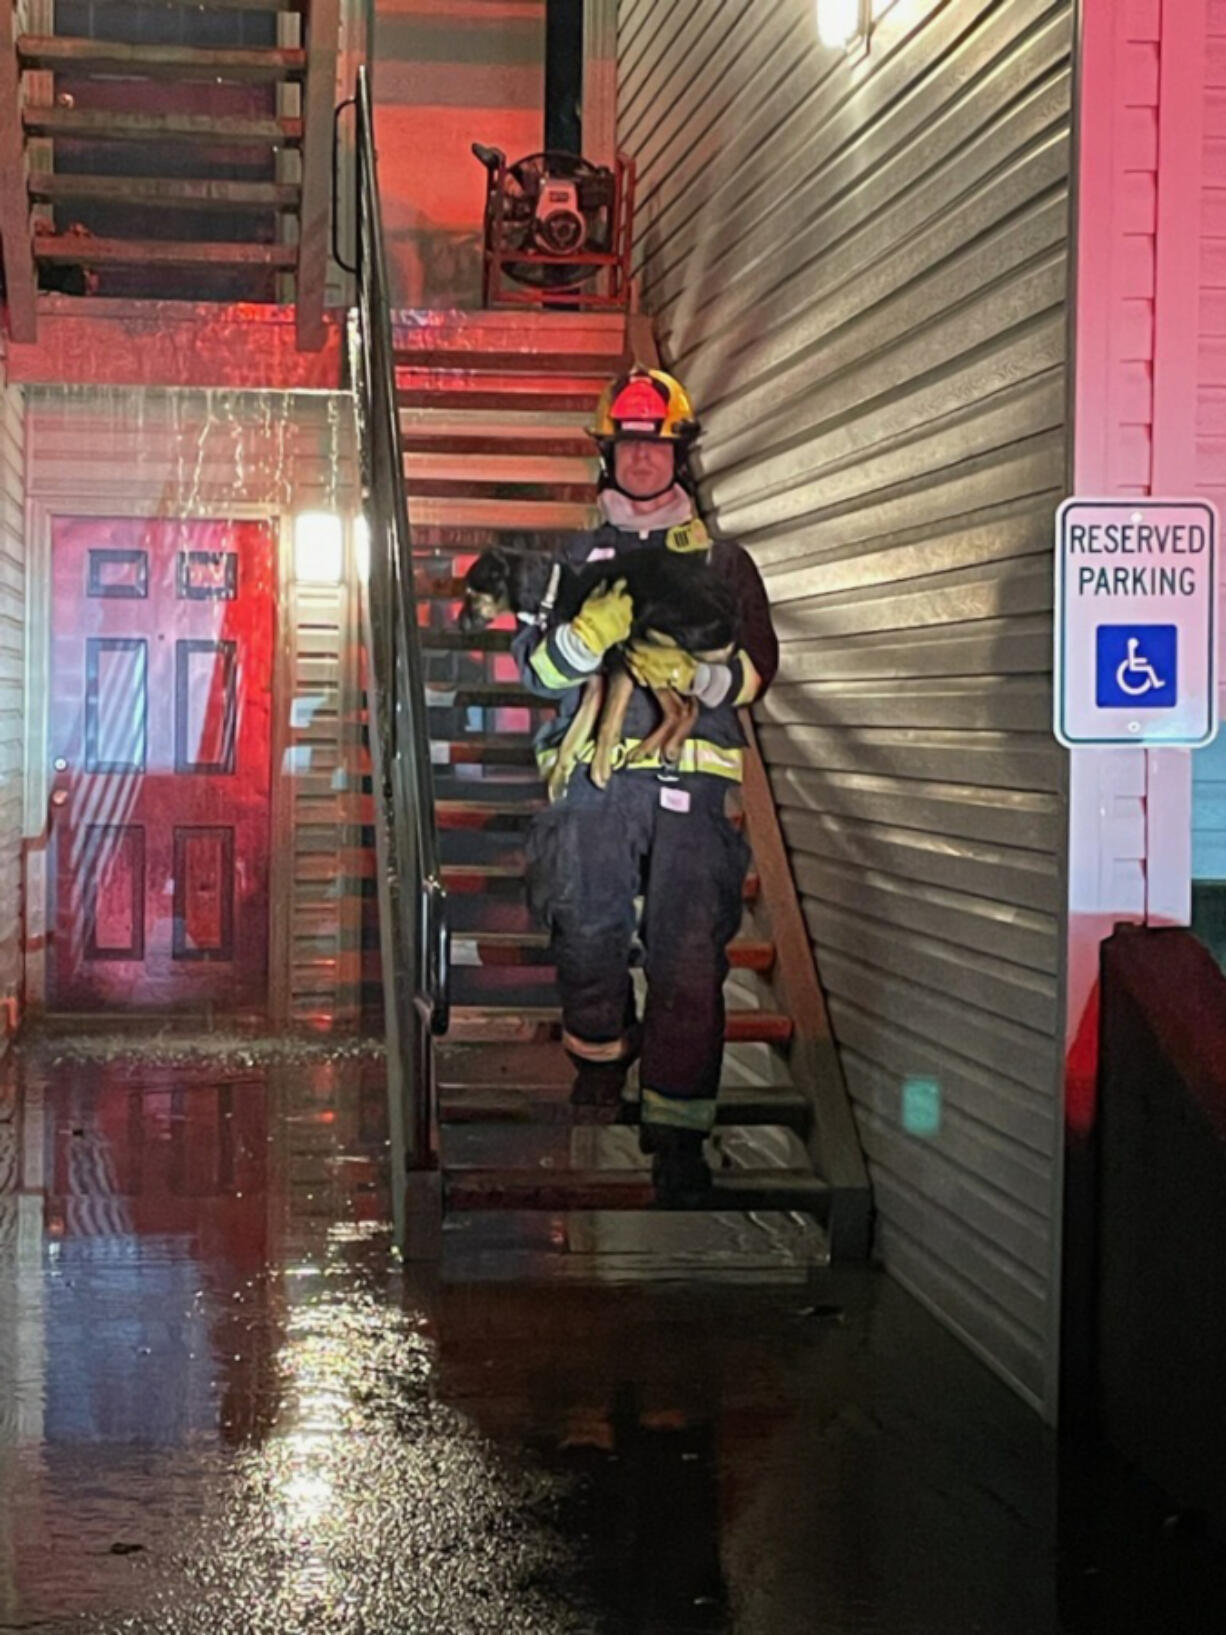 A dog is moved to safety by a Vancouver firefighter after an apartment fire Saturday evening at the Regency Apartments, 11301 S.E. 10th St. in Vancouver.